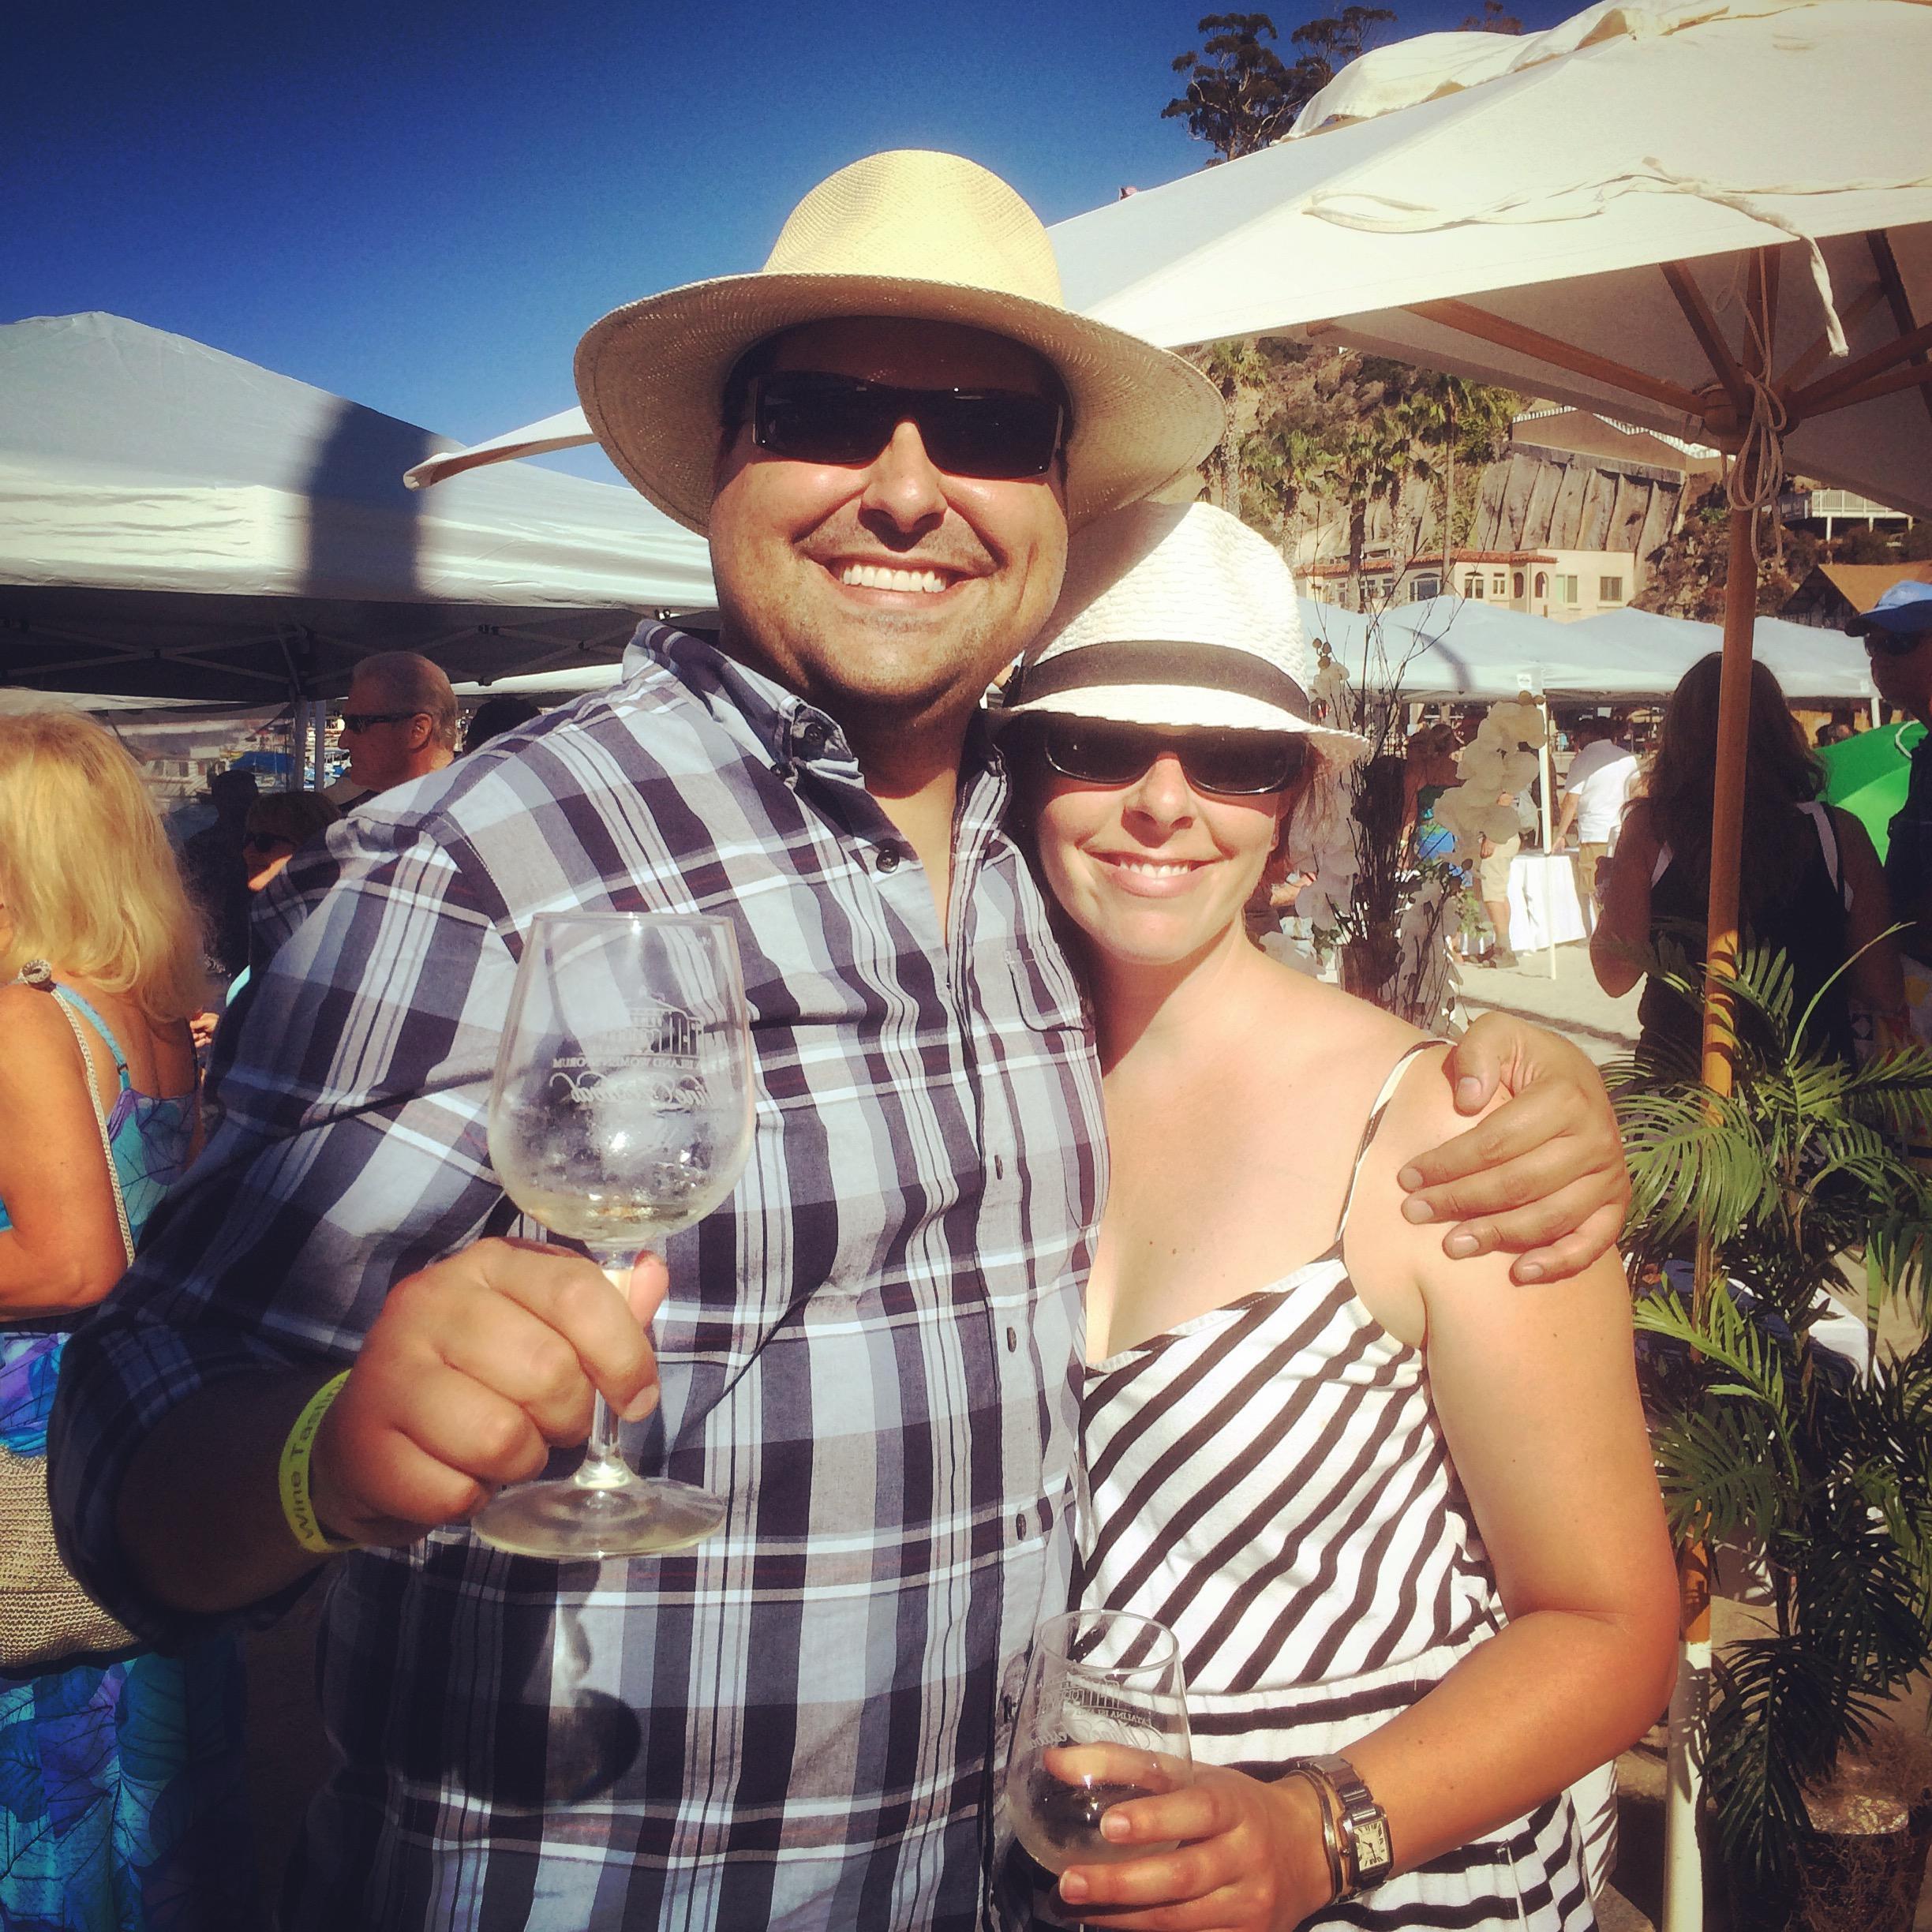 At the Catalina Island Women's Forum Wine Festival in 2015, an annual event that Michael and Laurel try not to miss!